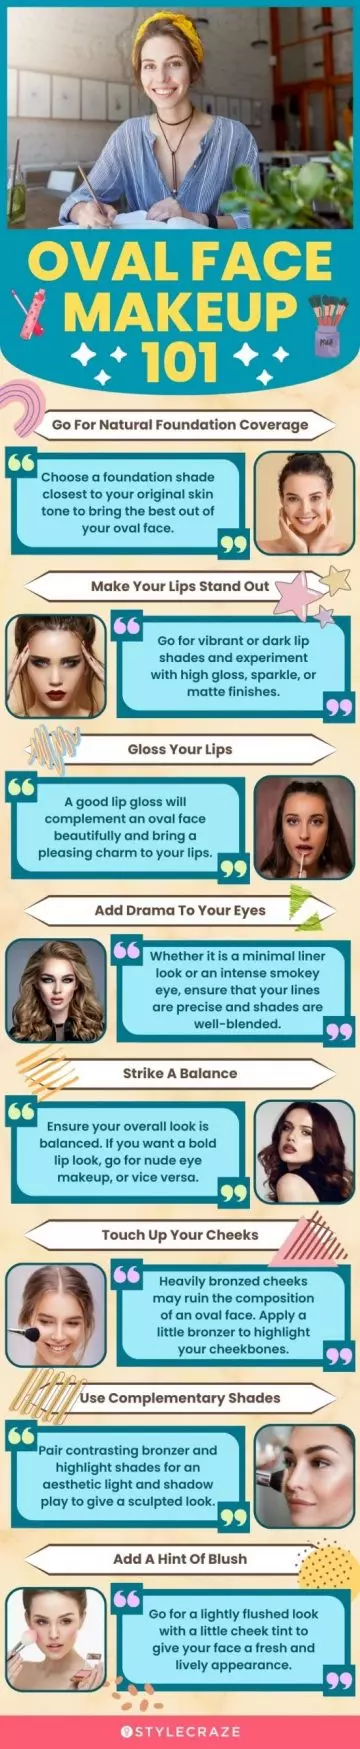 oval face makeup 101 (infographic)